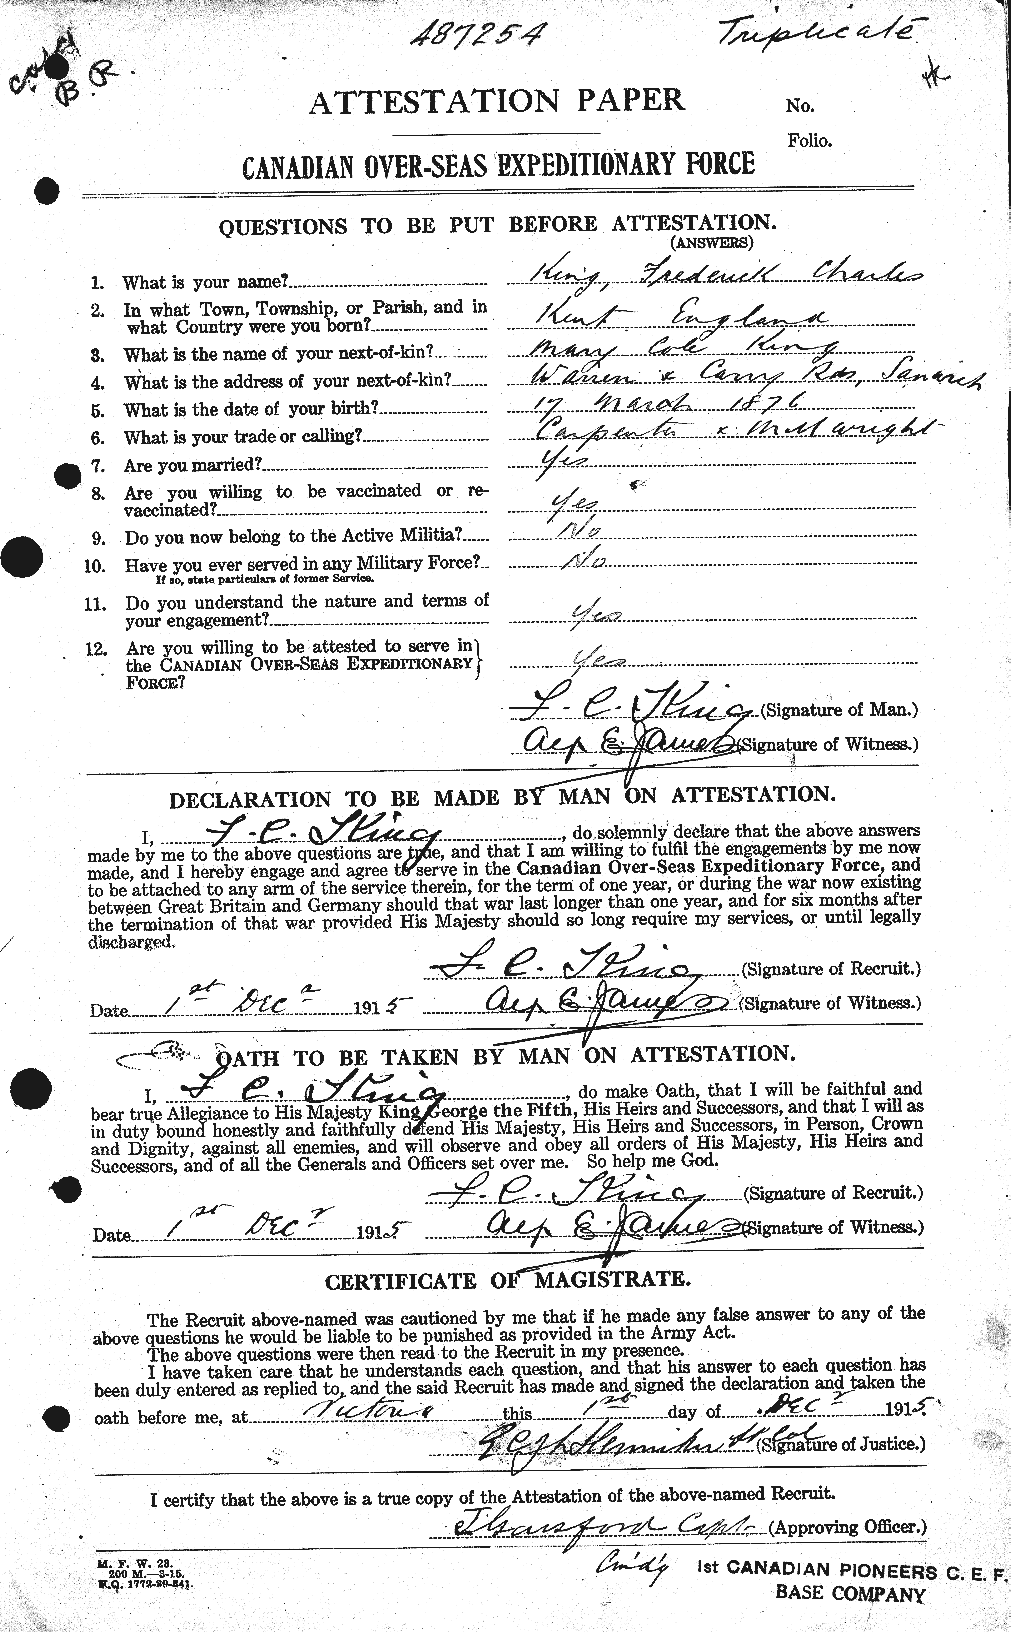 Personnel Records of the First World War - CEF 434288a